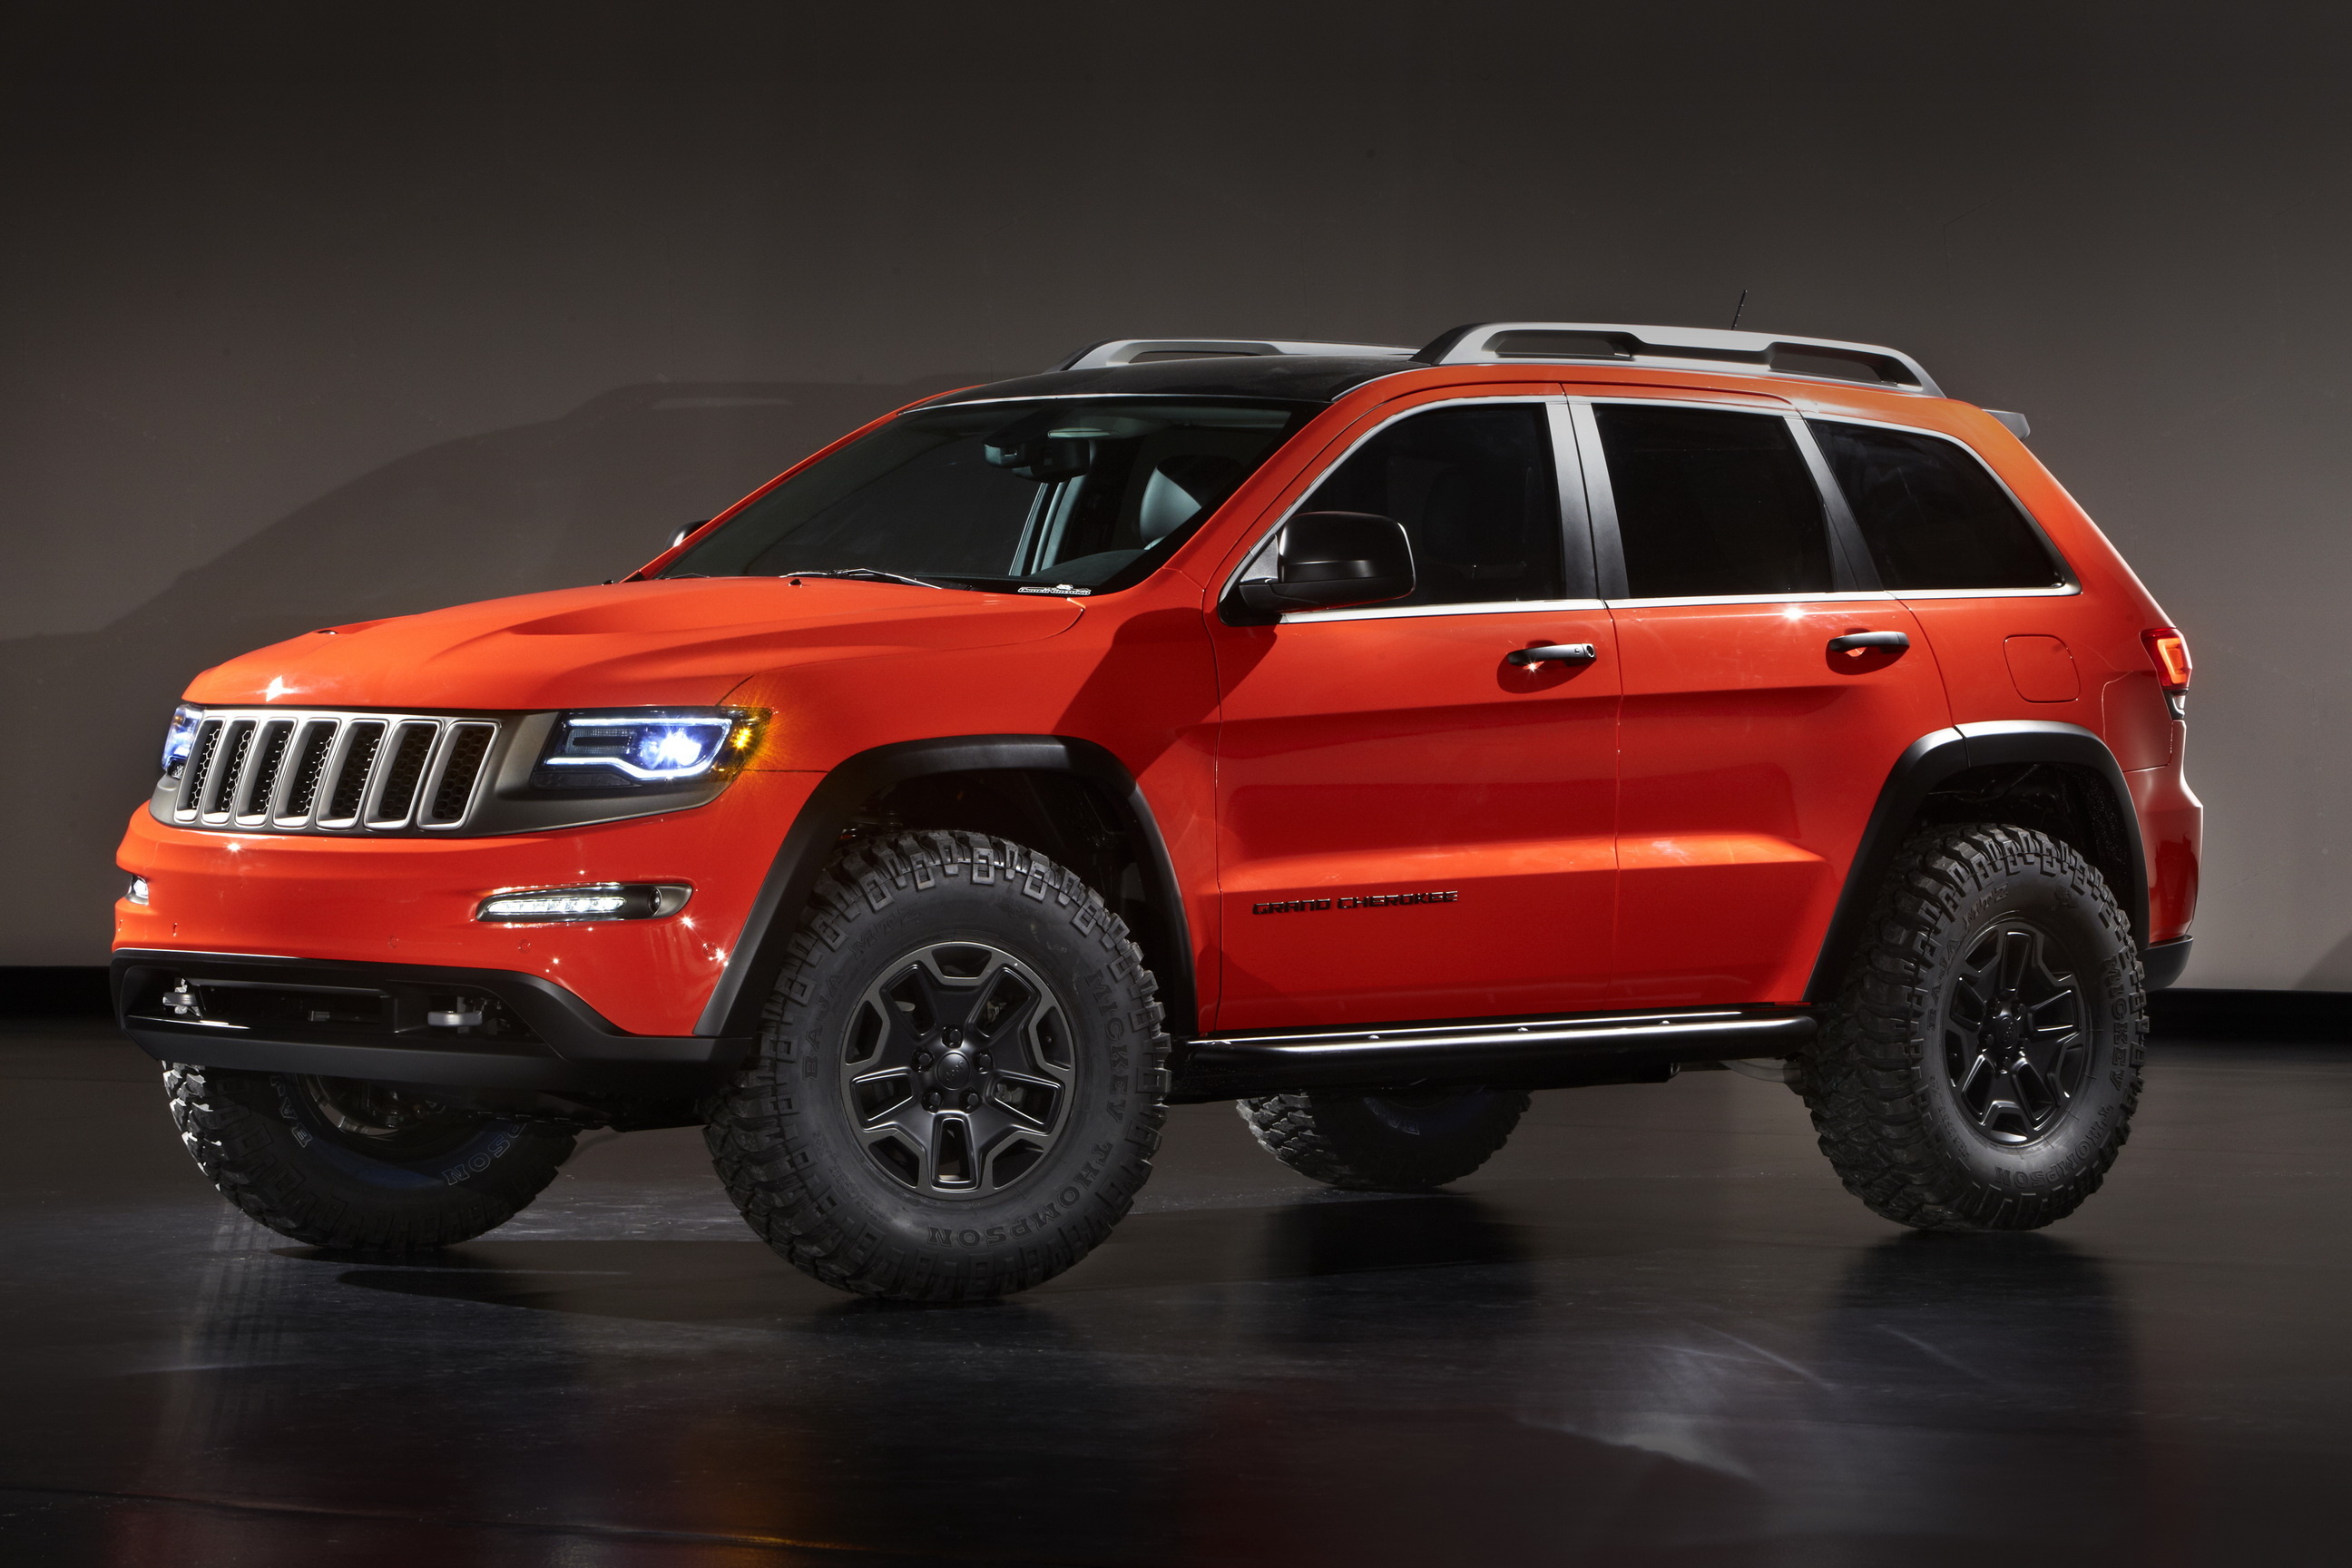 Wallpaper for mobile devices cars, jeep, mopar, grand cherokee